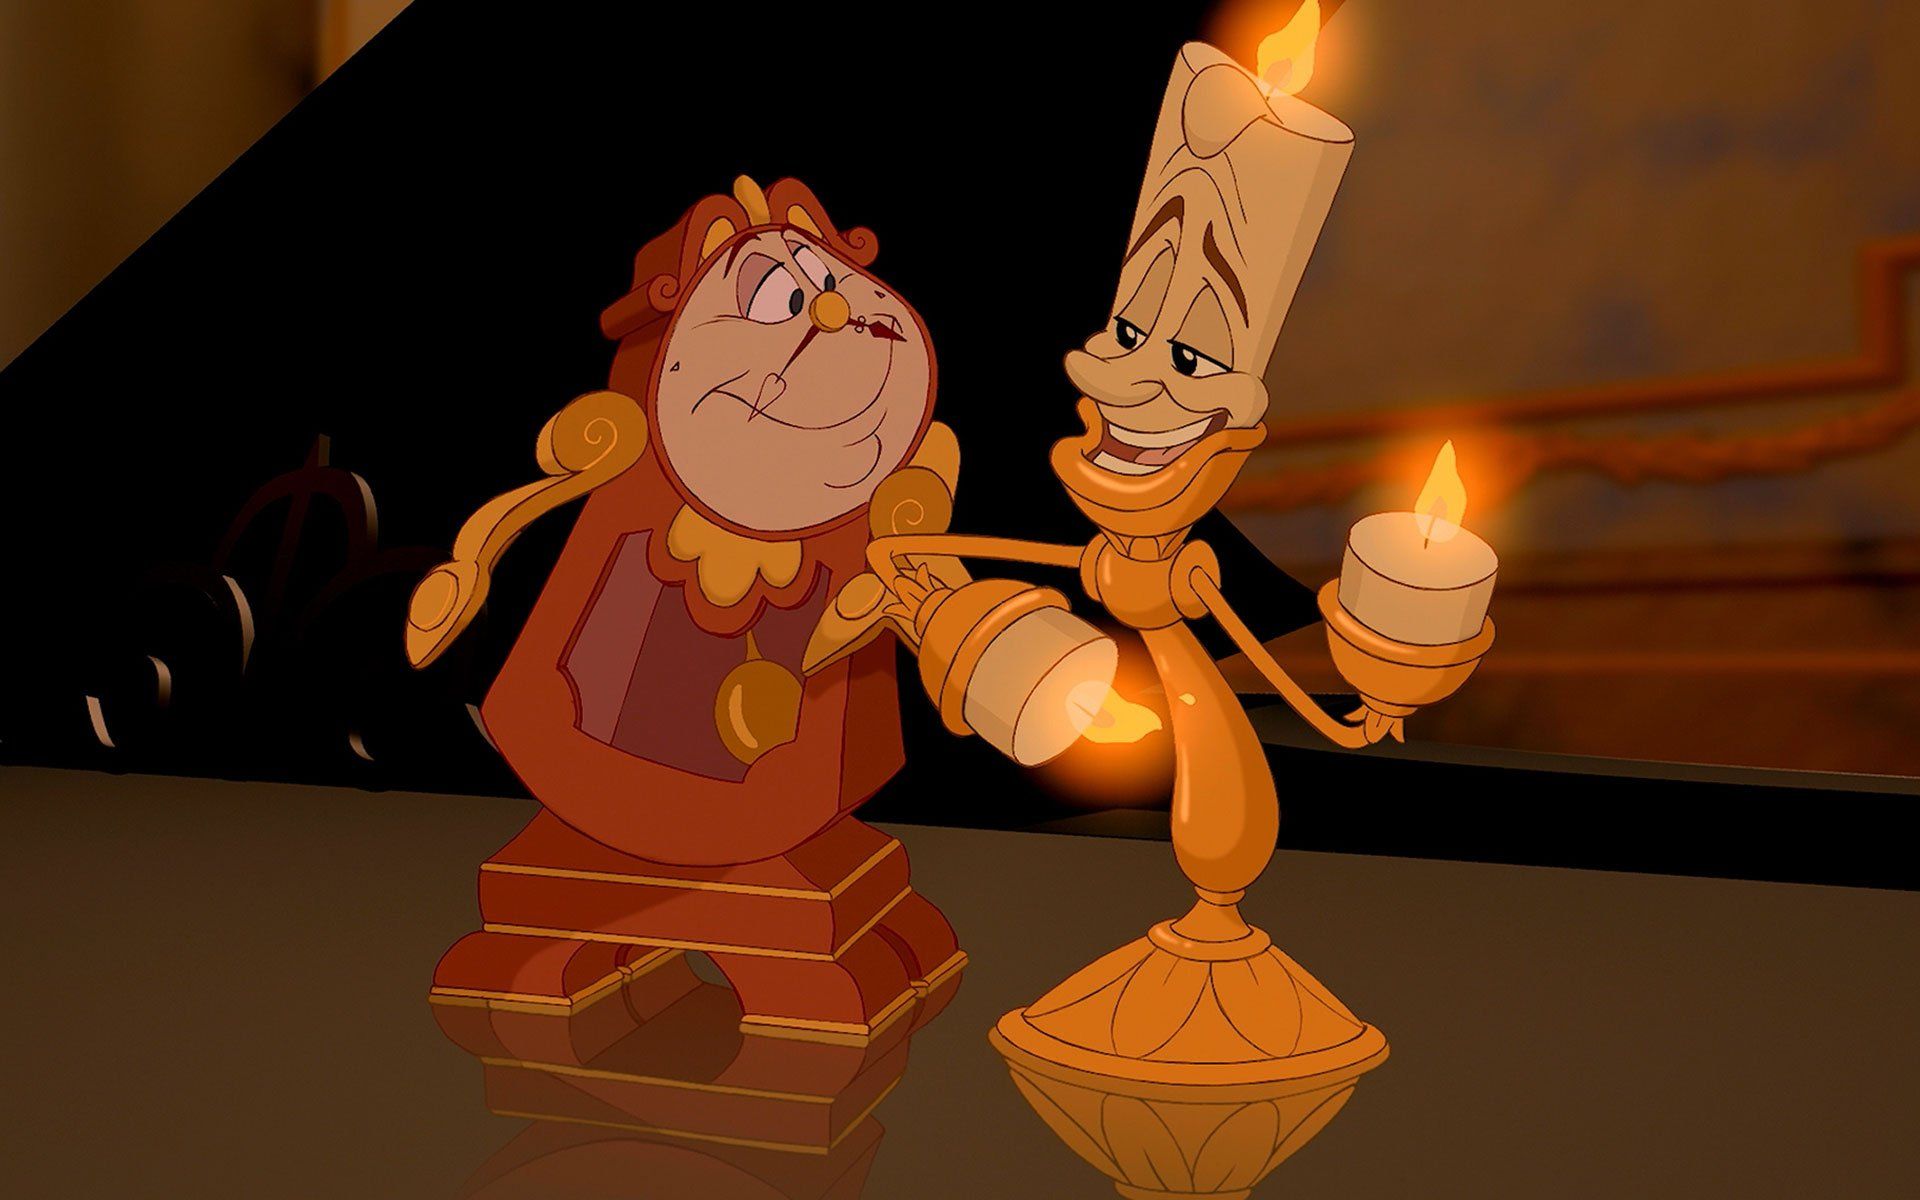 Cogsworth and Lumiere from Beauty and the Beast